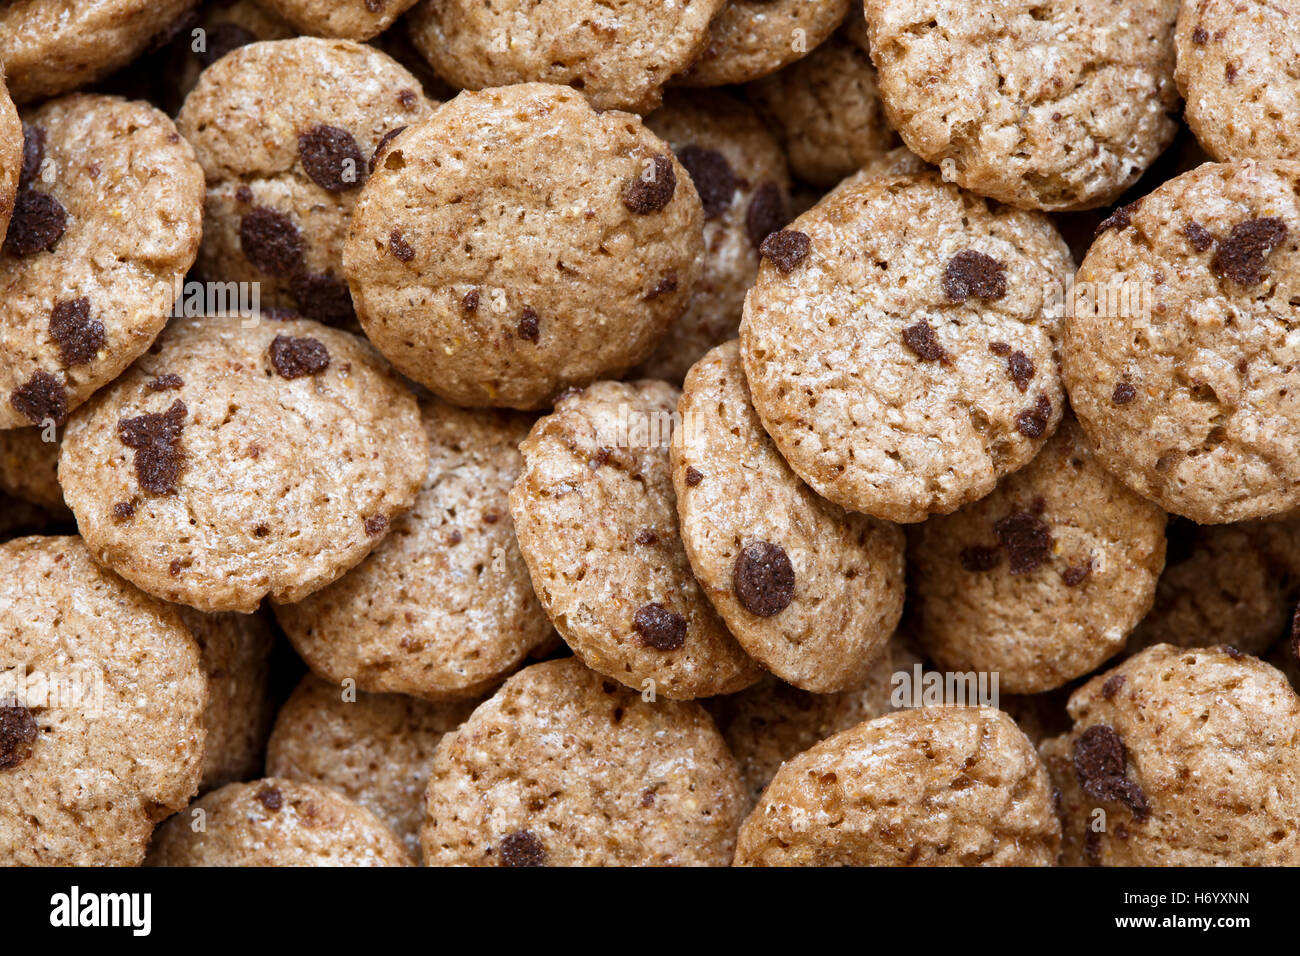 Background of chocolate chip cookies cereal from above. Stock Photo